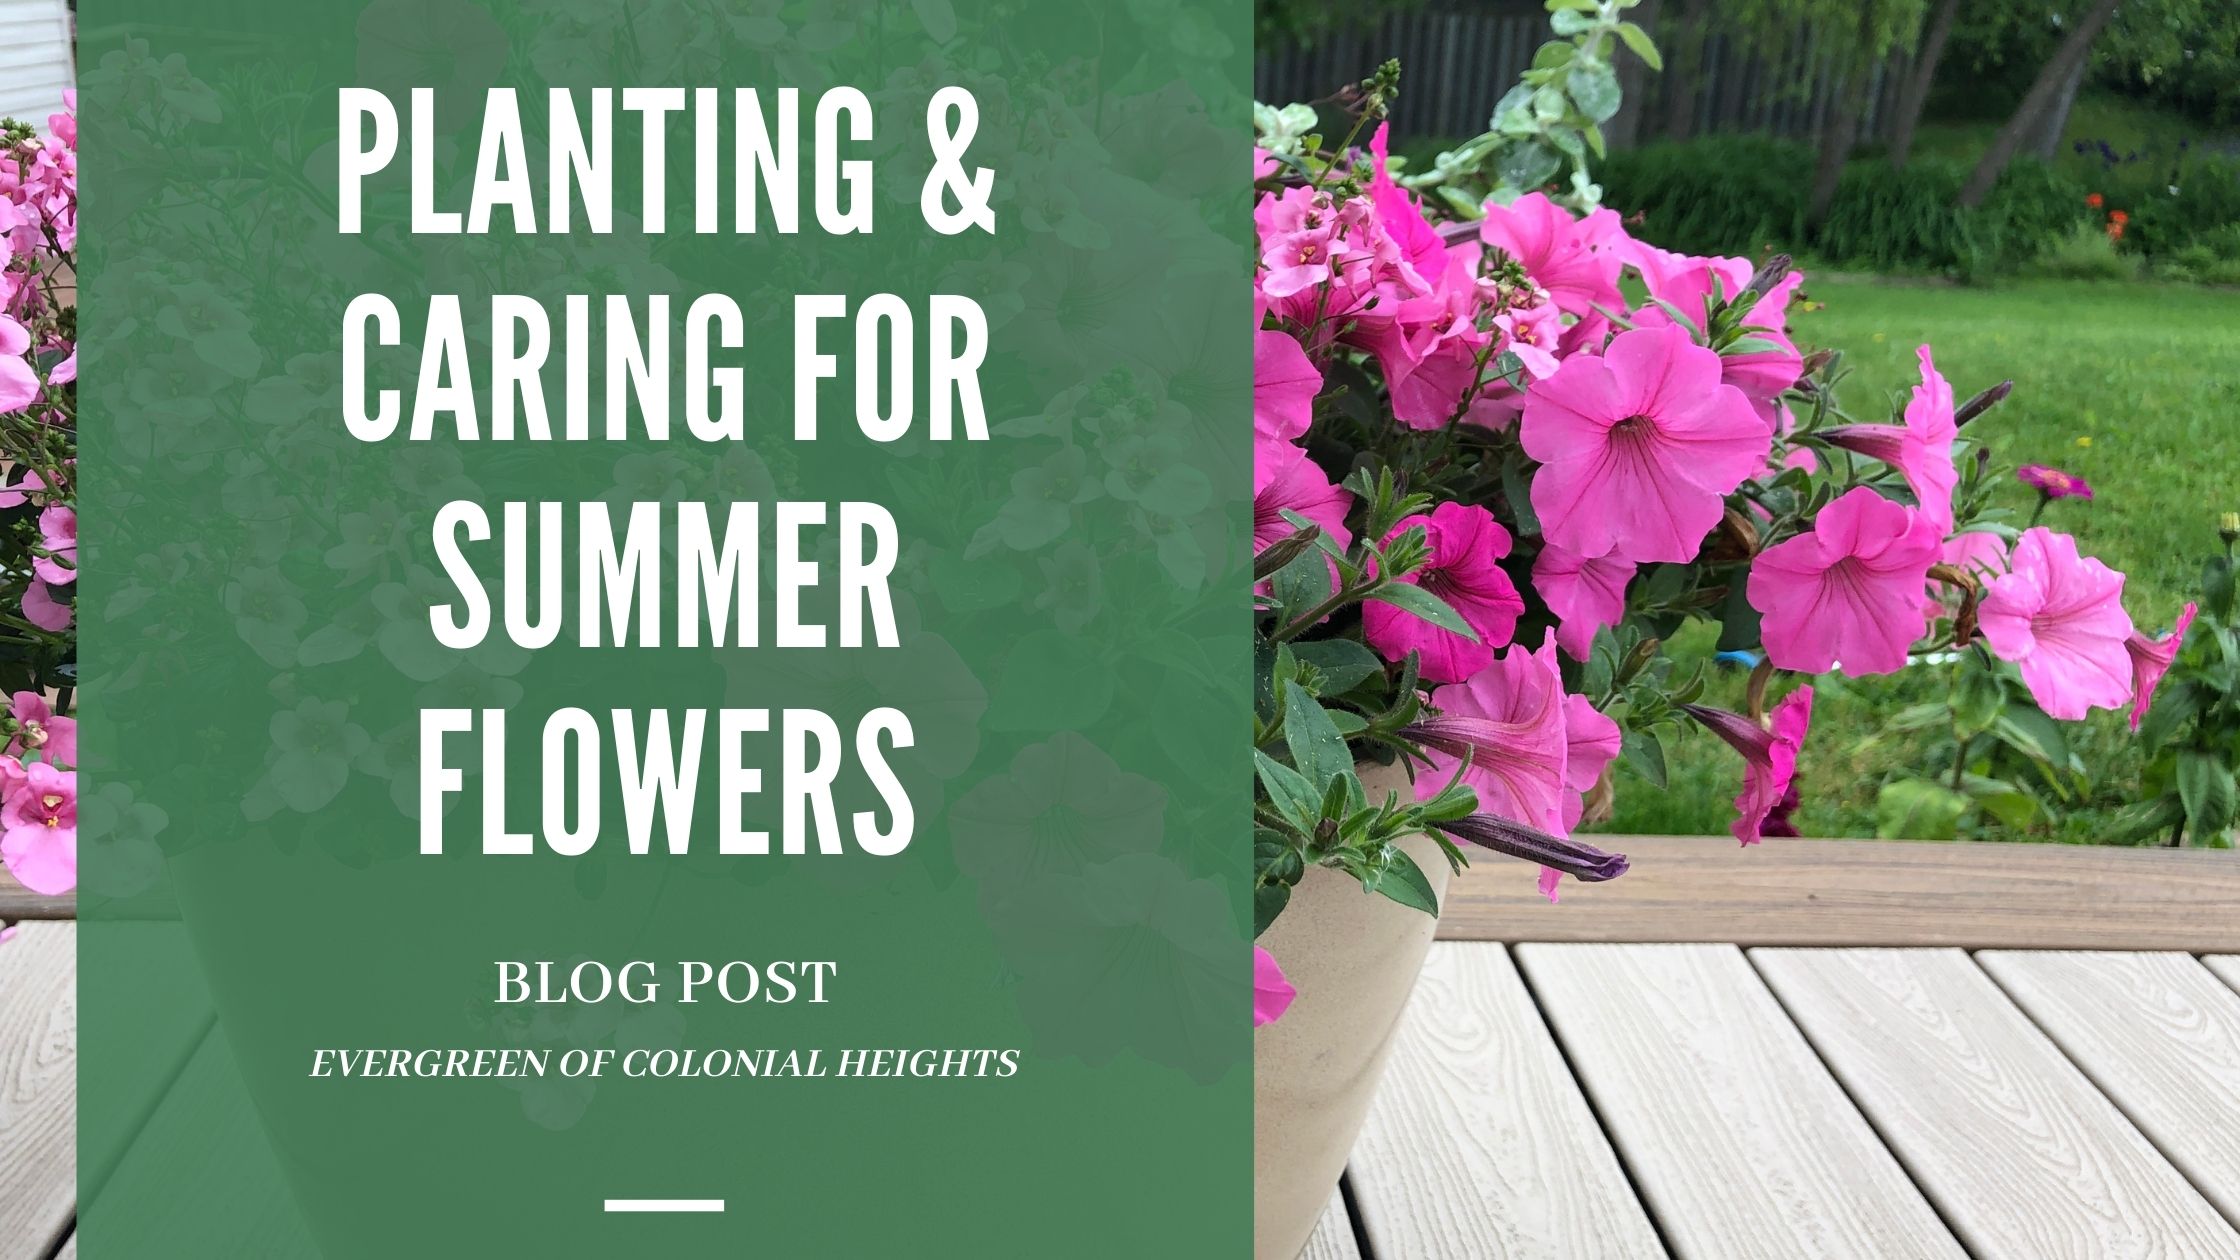 Planting & Caring for Summer Flowers